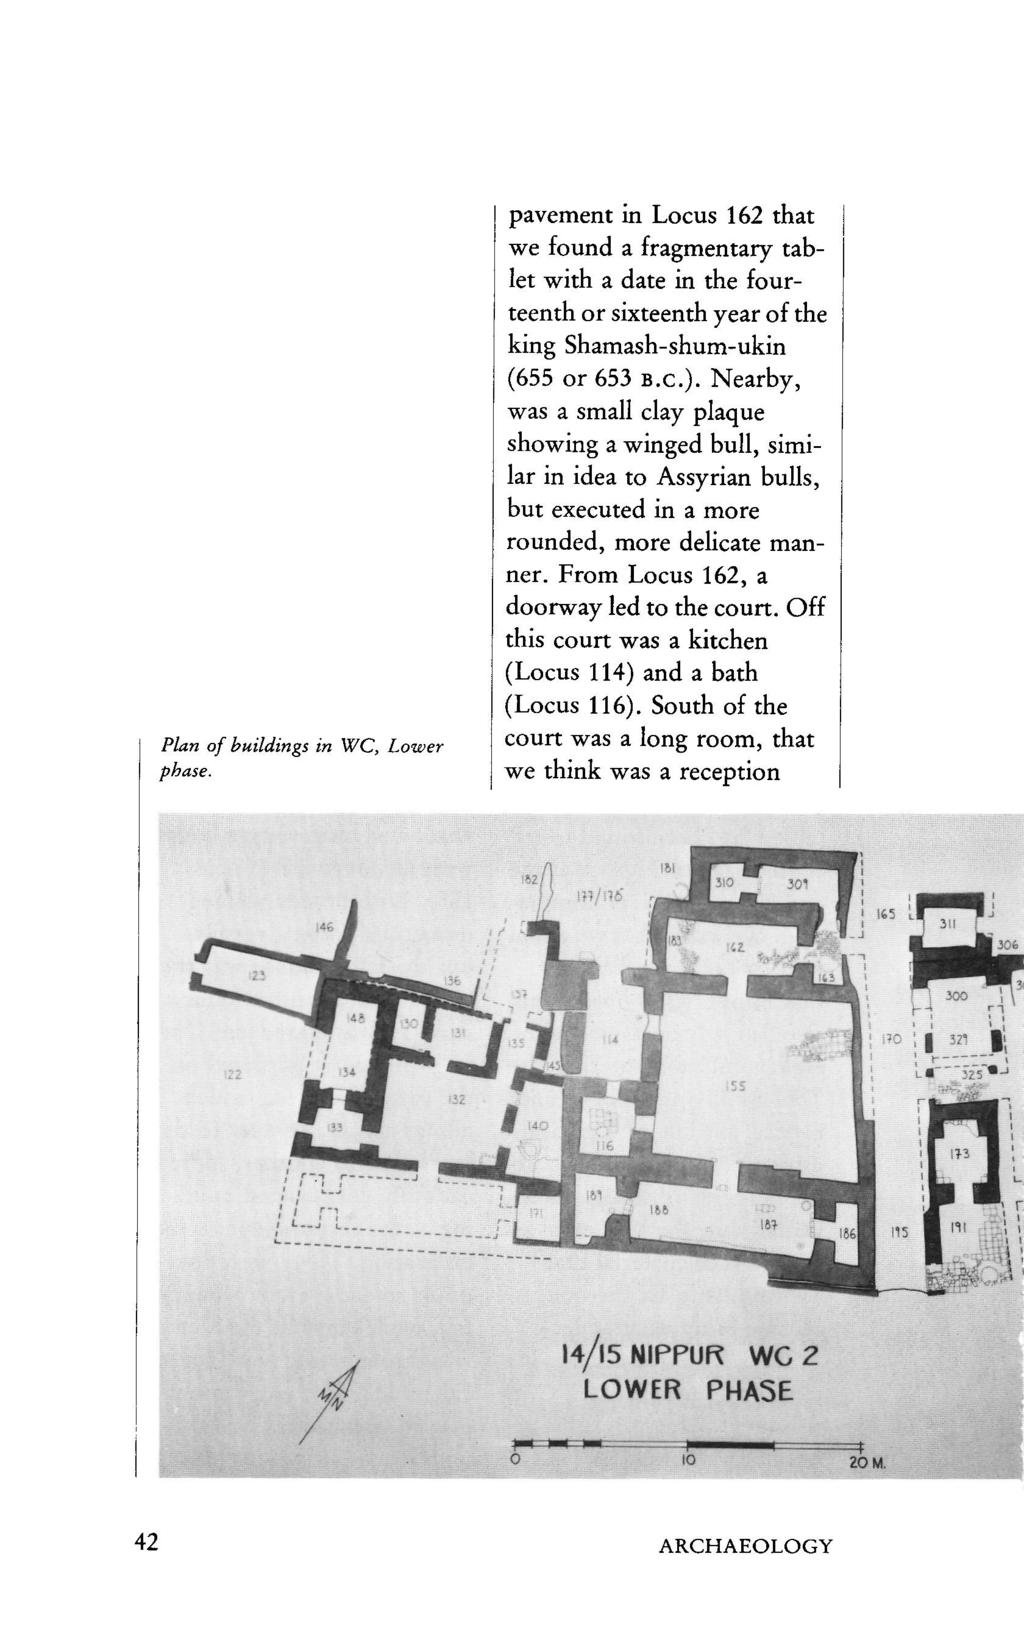 Plan of buildings in WC, Lower phase. pavement in Locus 162 that we found a fragmentary tablet with a date in the fourteenth or sixteenth year of the king Shamash-shum-ukin (655 or 653 B.C.).